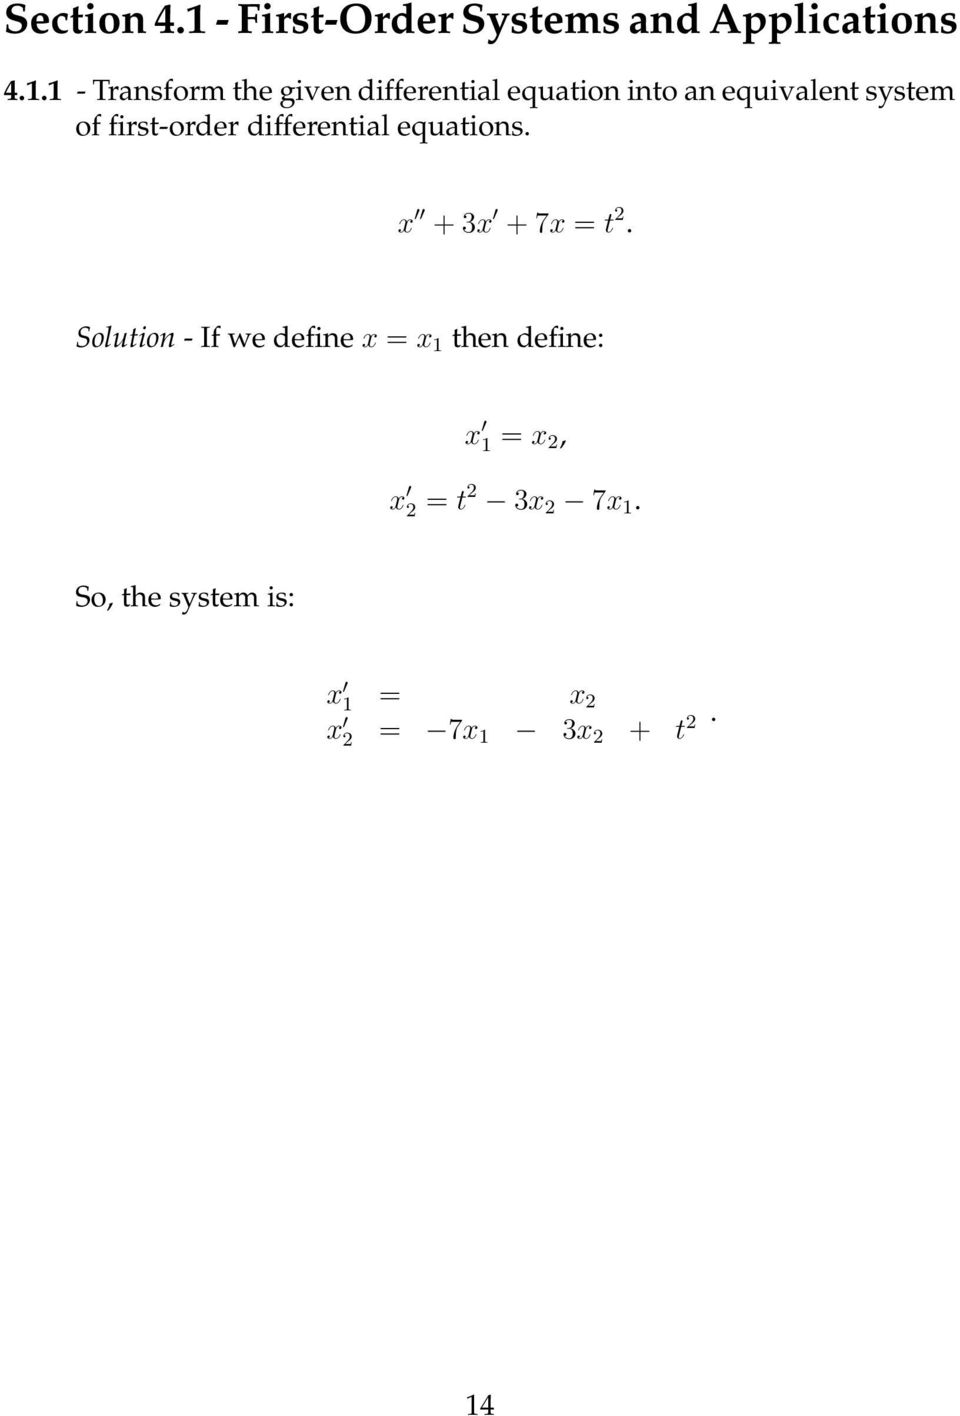 1 - Transform the given differential equation into an equivalent system of